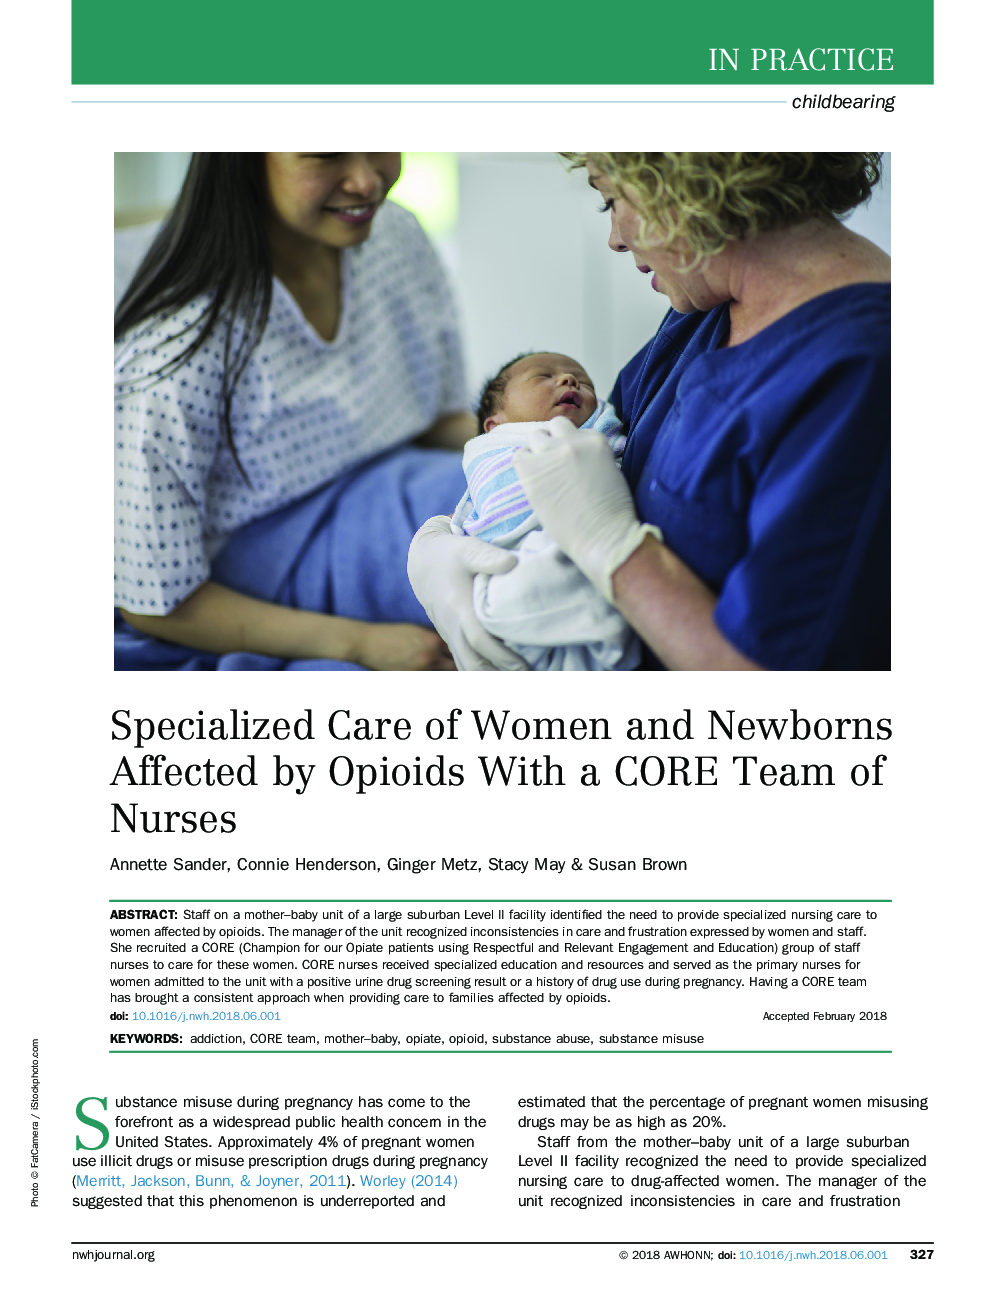 Specialized Care of Women and Newborns Affected by Opioids With a CORE Team of Nurses